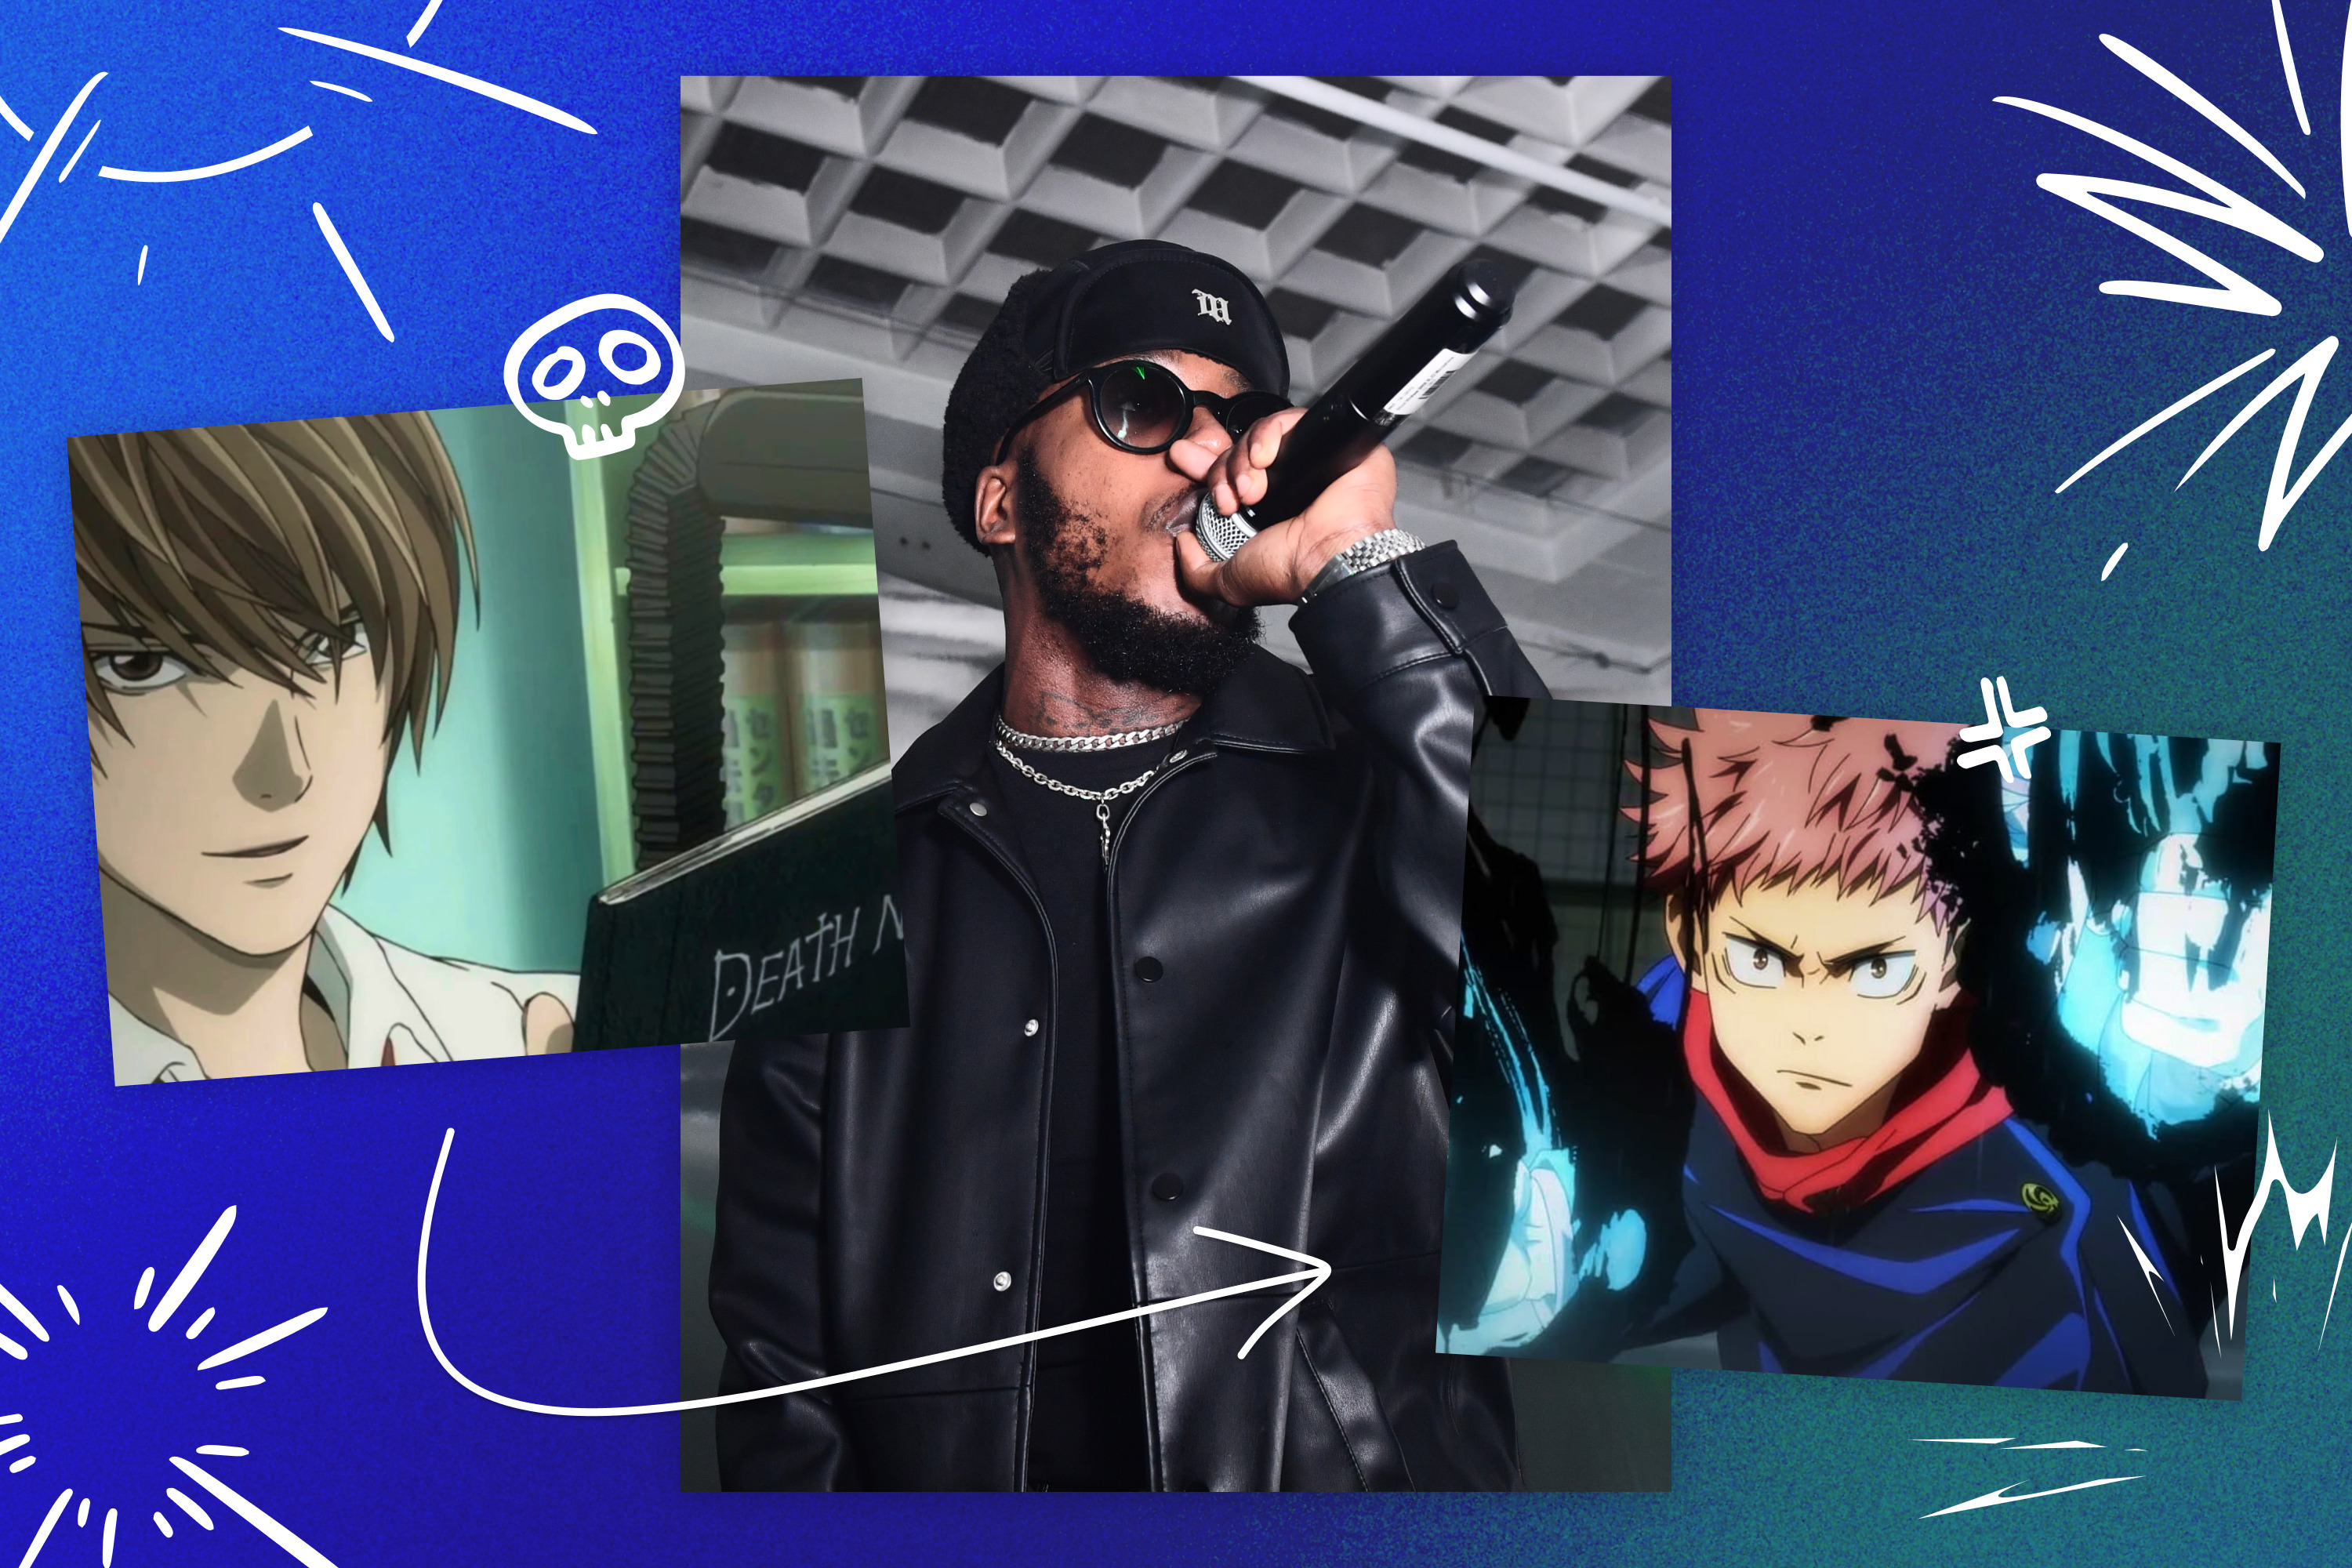 A header image featuring a photo of Che Lingo, UK-based rapper-songwriter, flanked by images from Death Note and Jujutsu Kaisen.